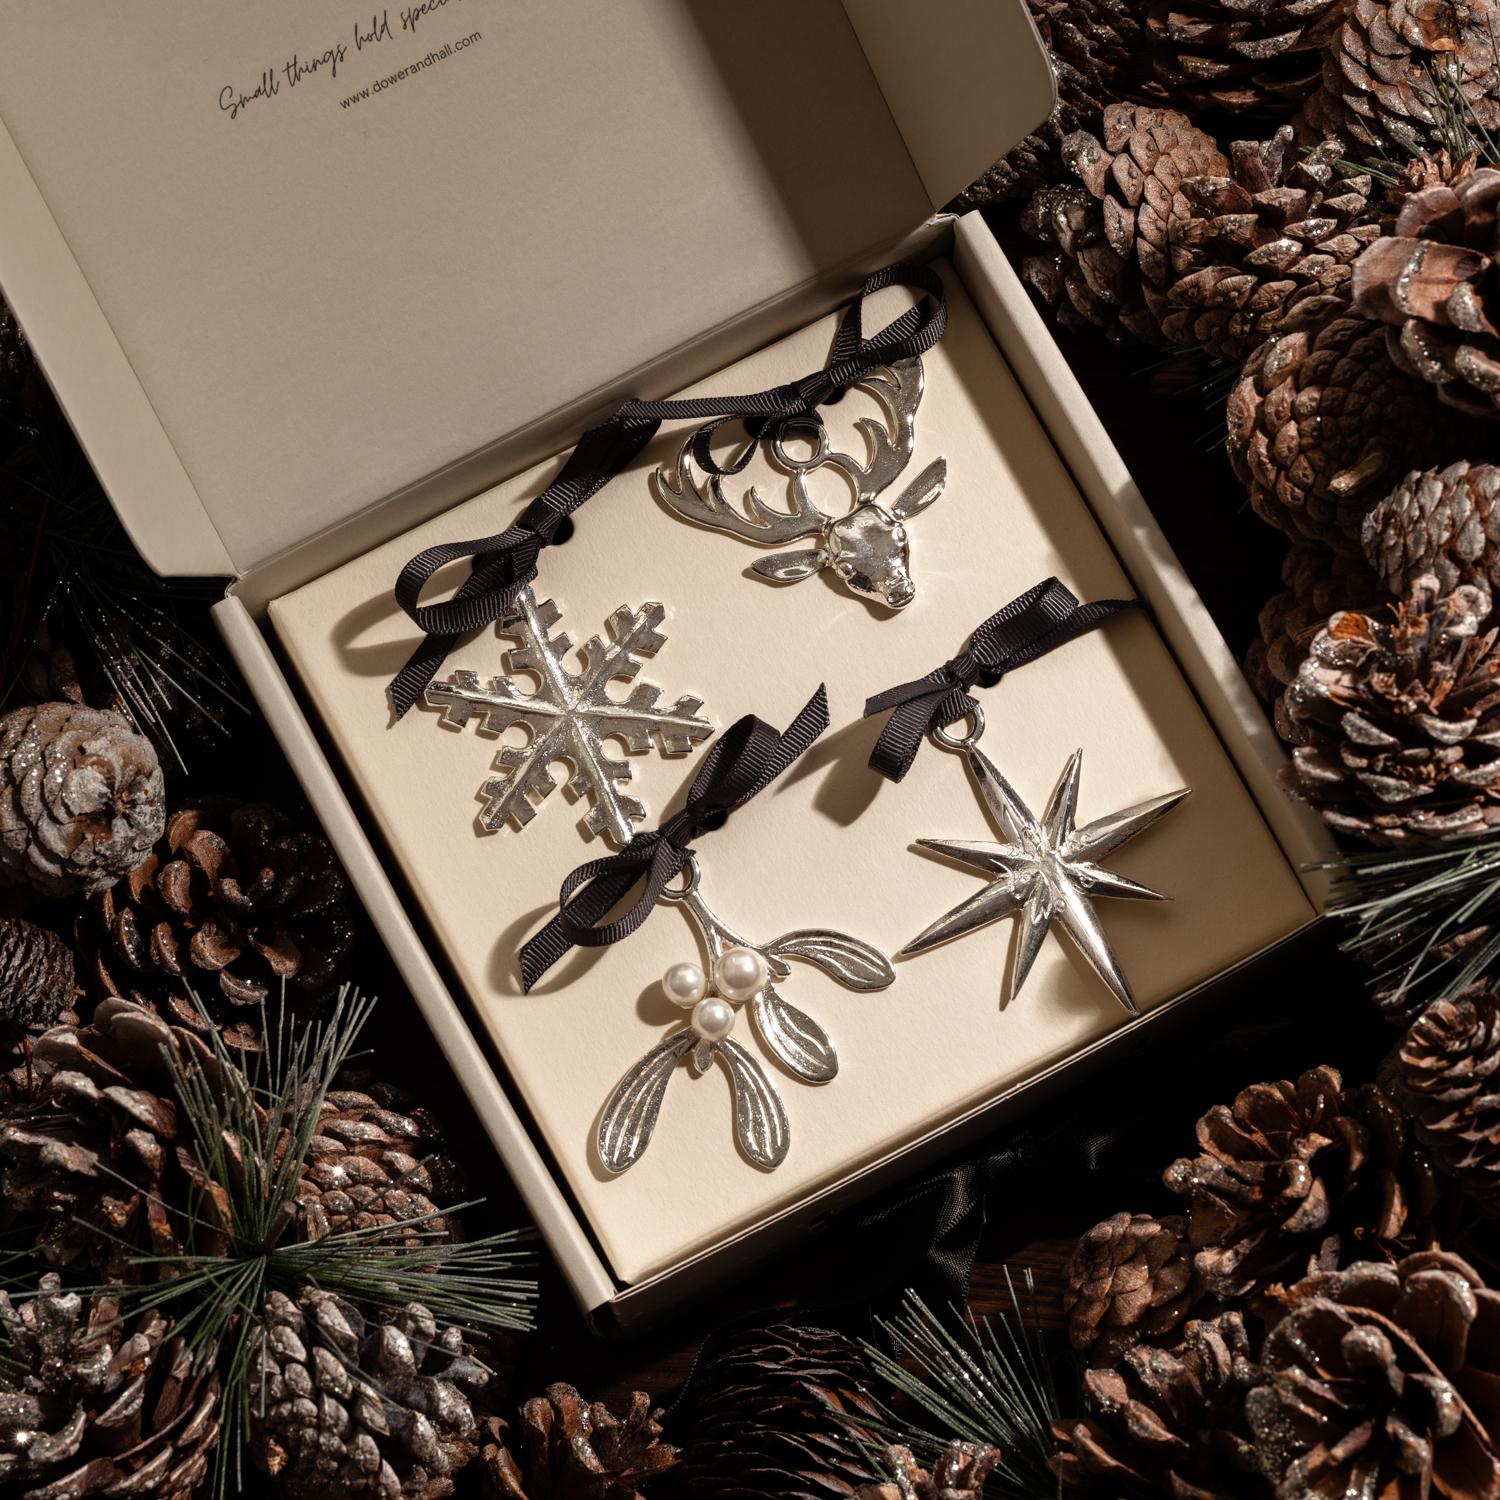 For over 25 years we have been handmaking our pewter tree decorations with love and care at our workshop in the UK. Each year Dan and Diane produce new designs, so why not start your own collection to adorn your Christmas tree.
Make your home